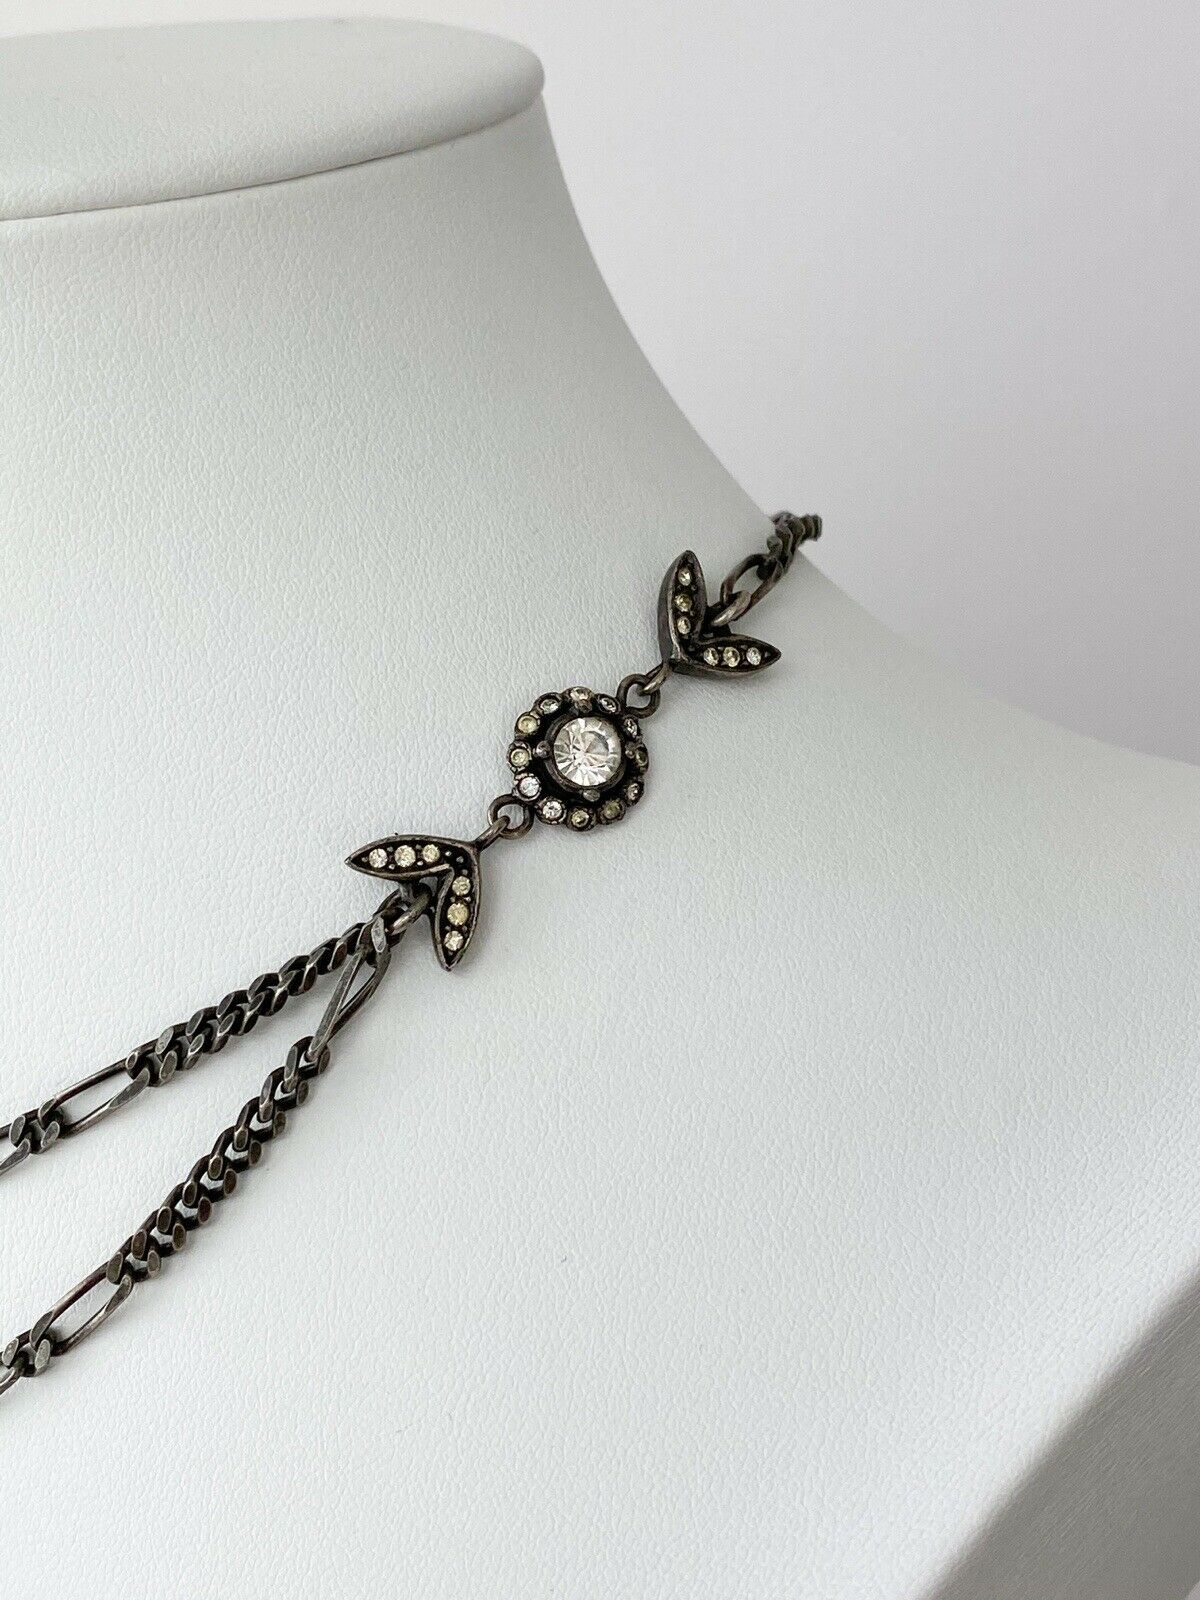 【SOLD OUT】Christian Dior Vintage Necklace Black Tone Flower Rhinestone